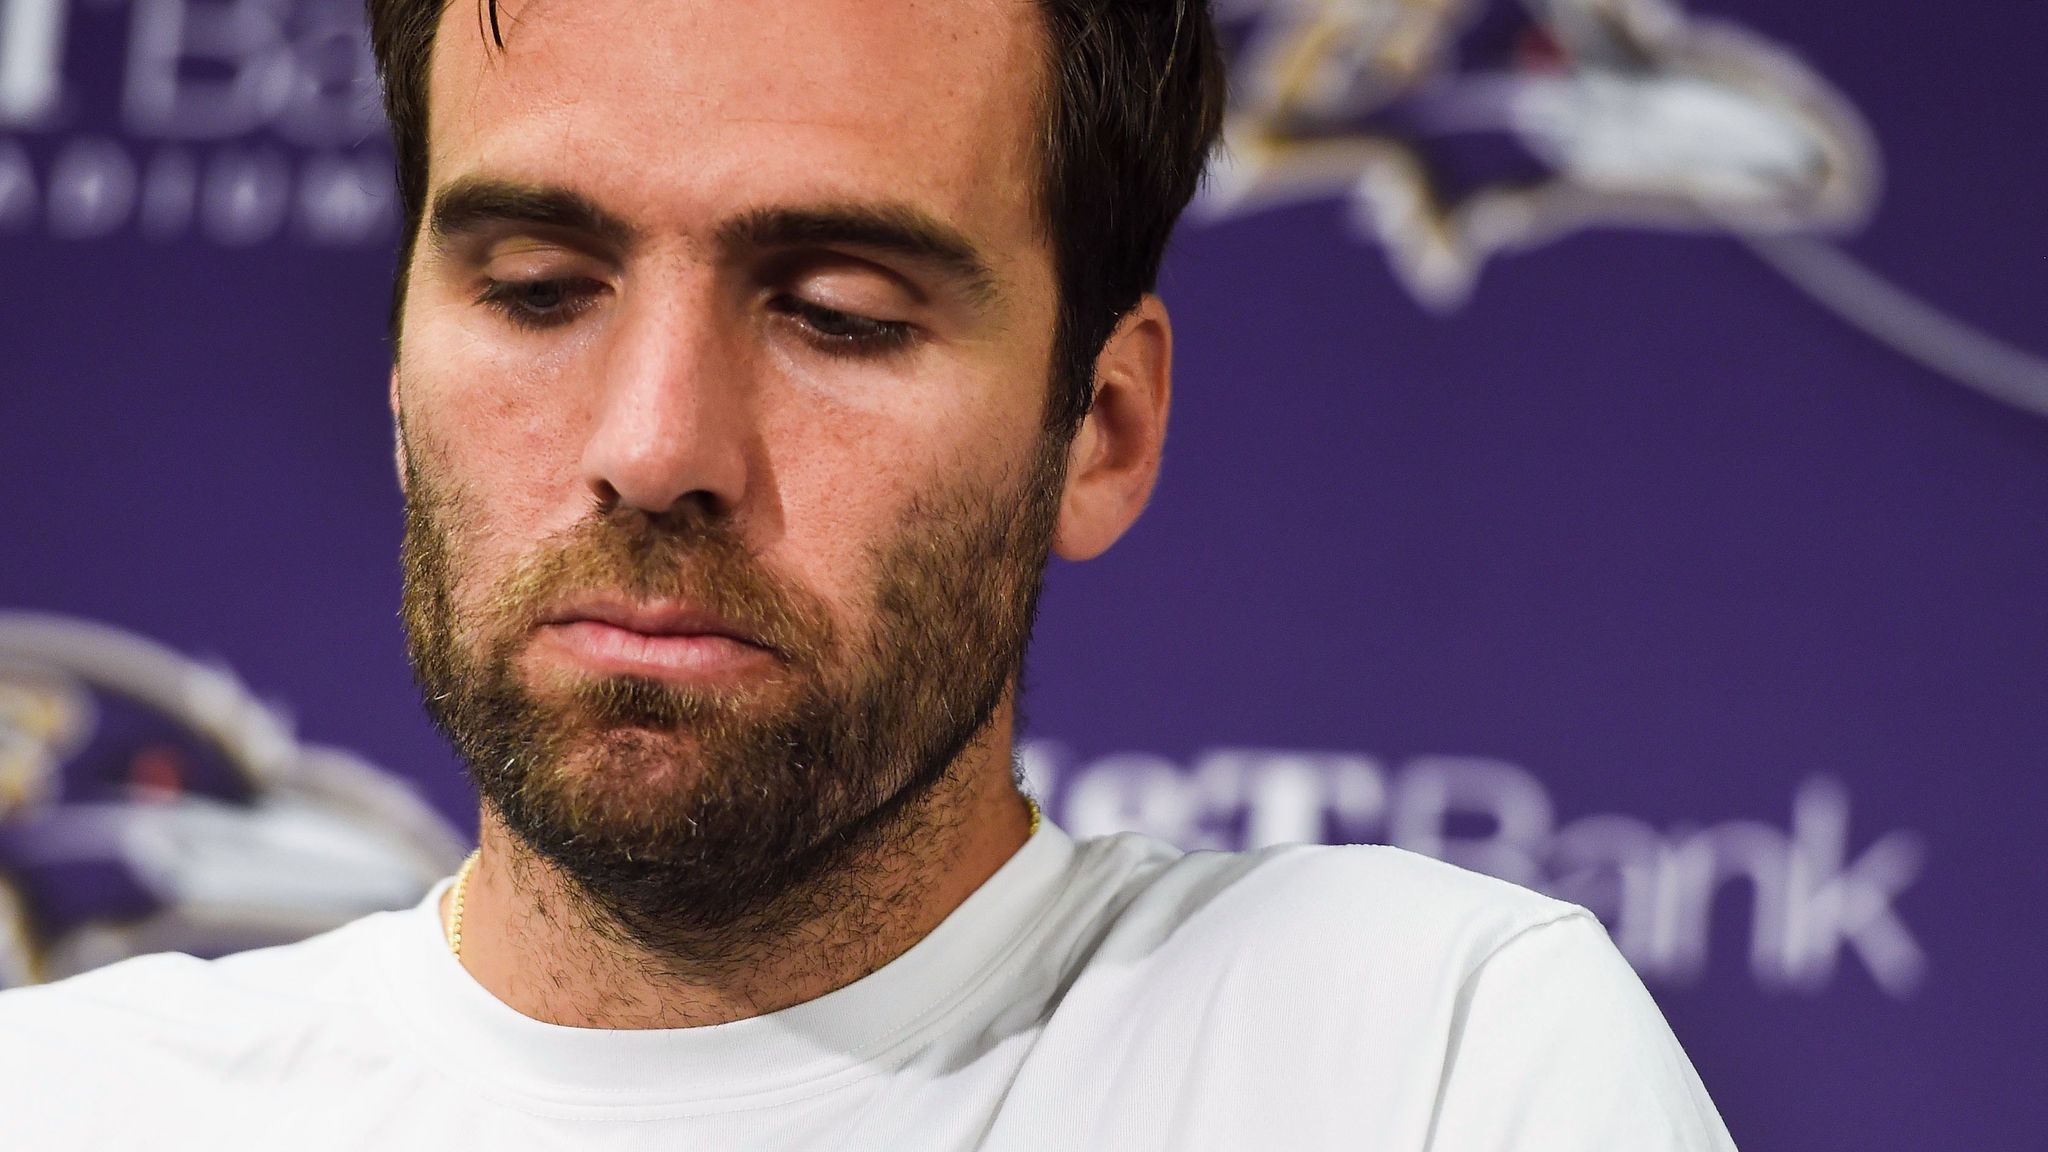 Ravens' Joe Flacco named one of NFL's most overrated quarterbacks in player survey ...